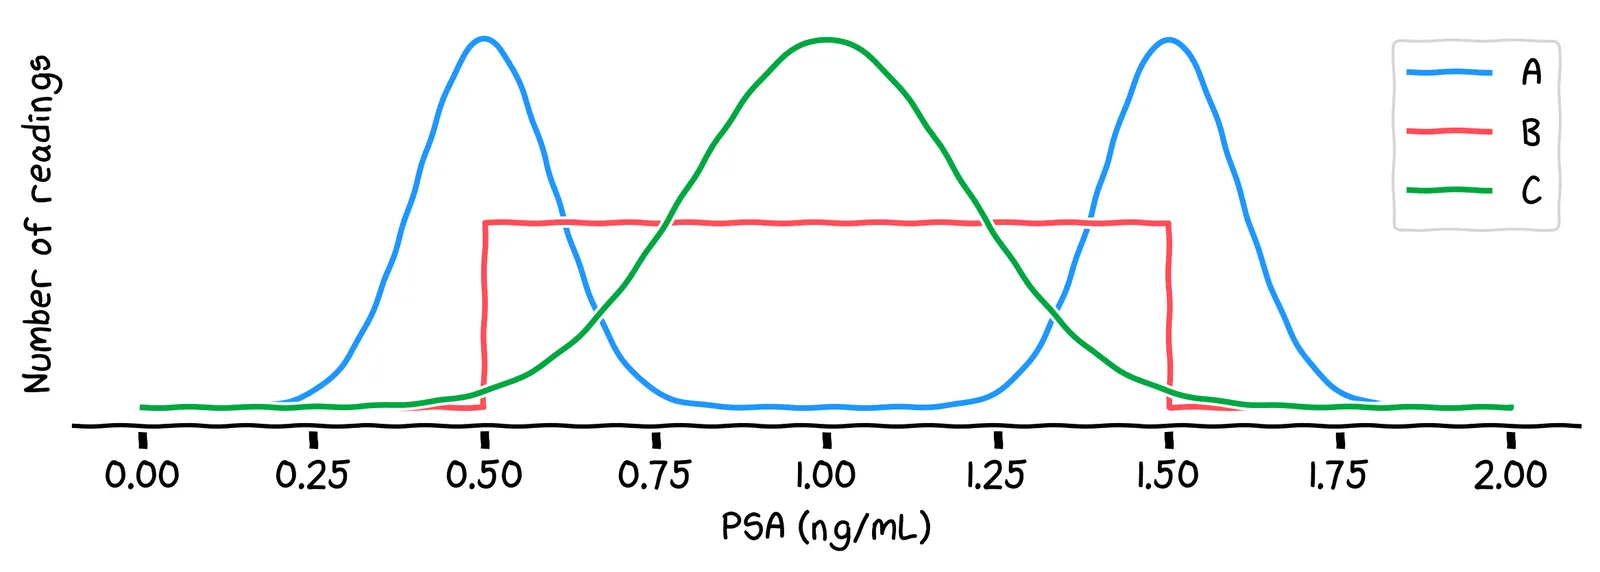 Three distributions, A, B and C. Line A is a bimodal distribution with peaks at 0.5 and 1.5. Line B is a uniform distribution between 0.5 and 1.5. Line C is a normal distribution with a peak at 1.0.